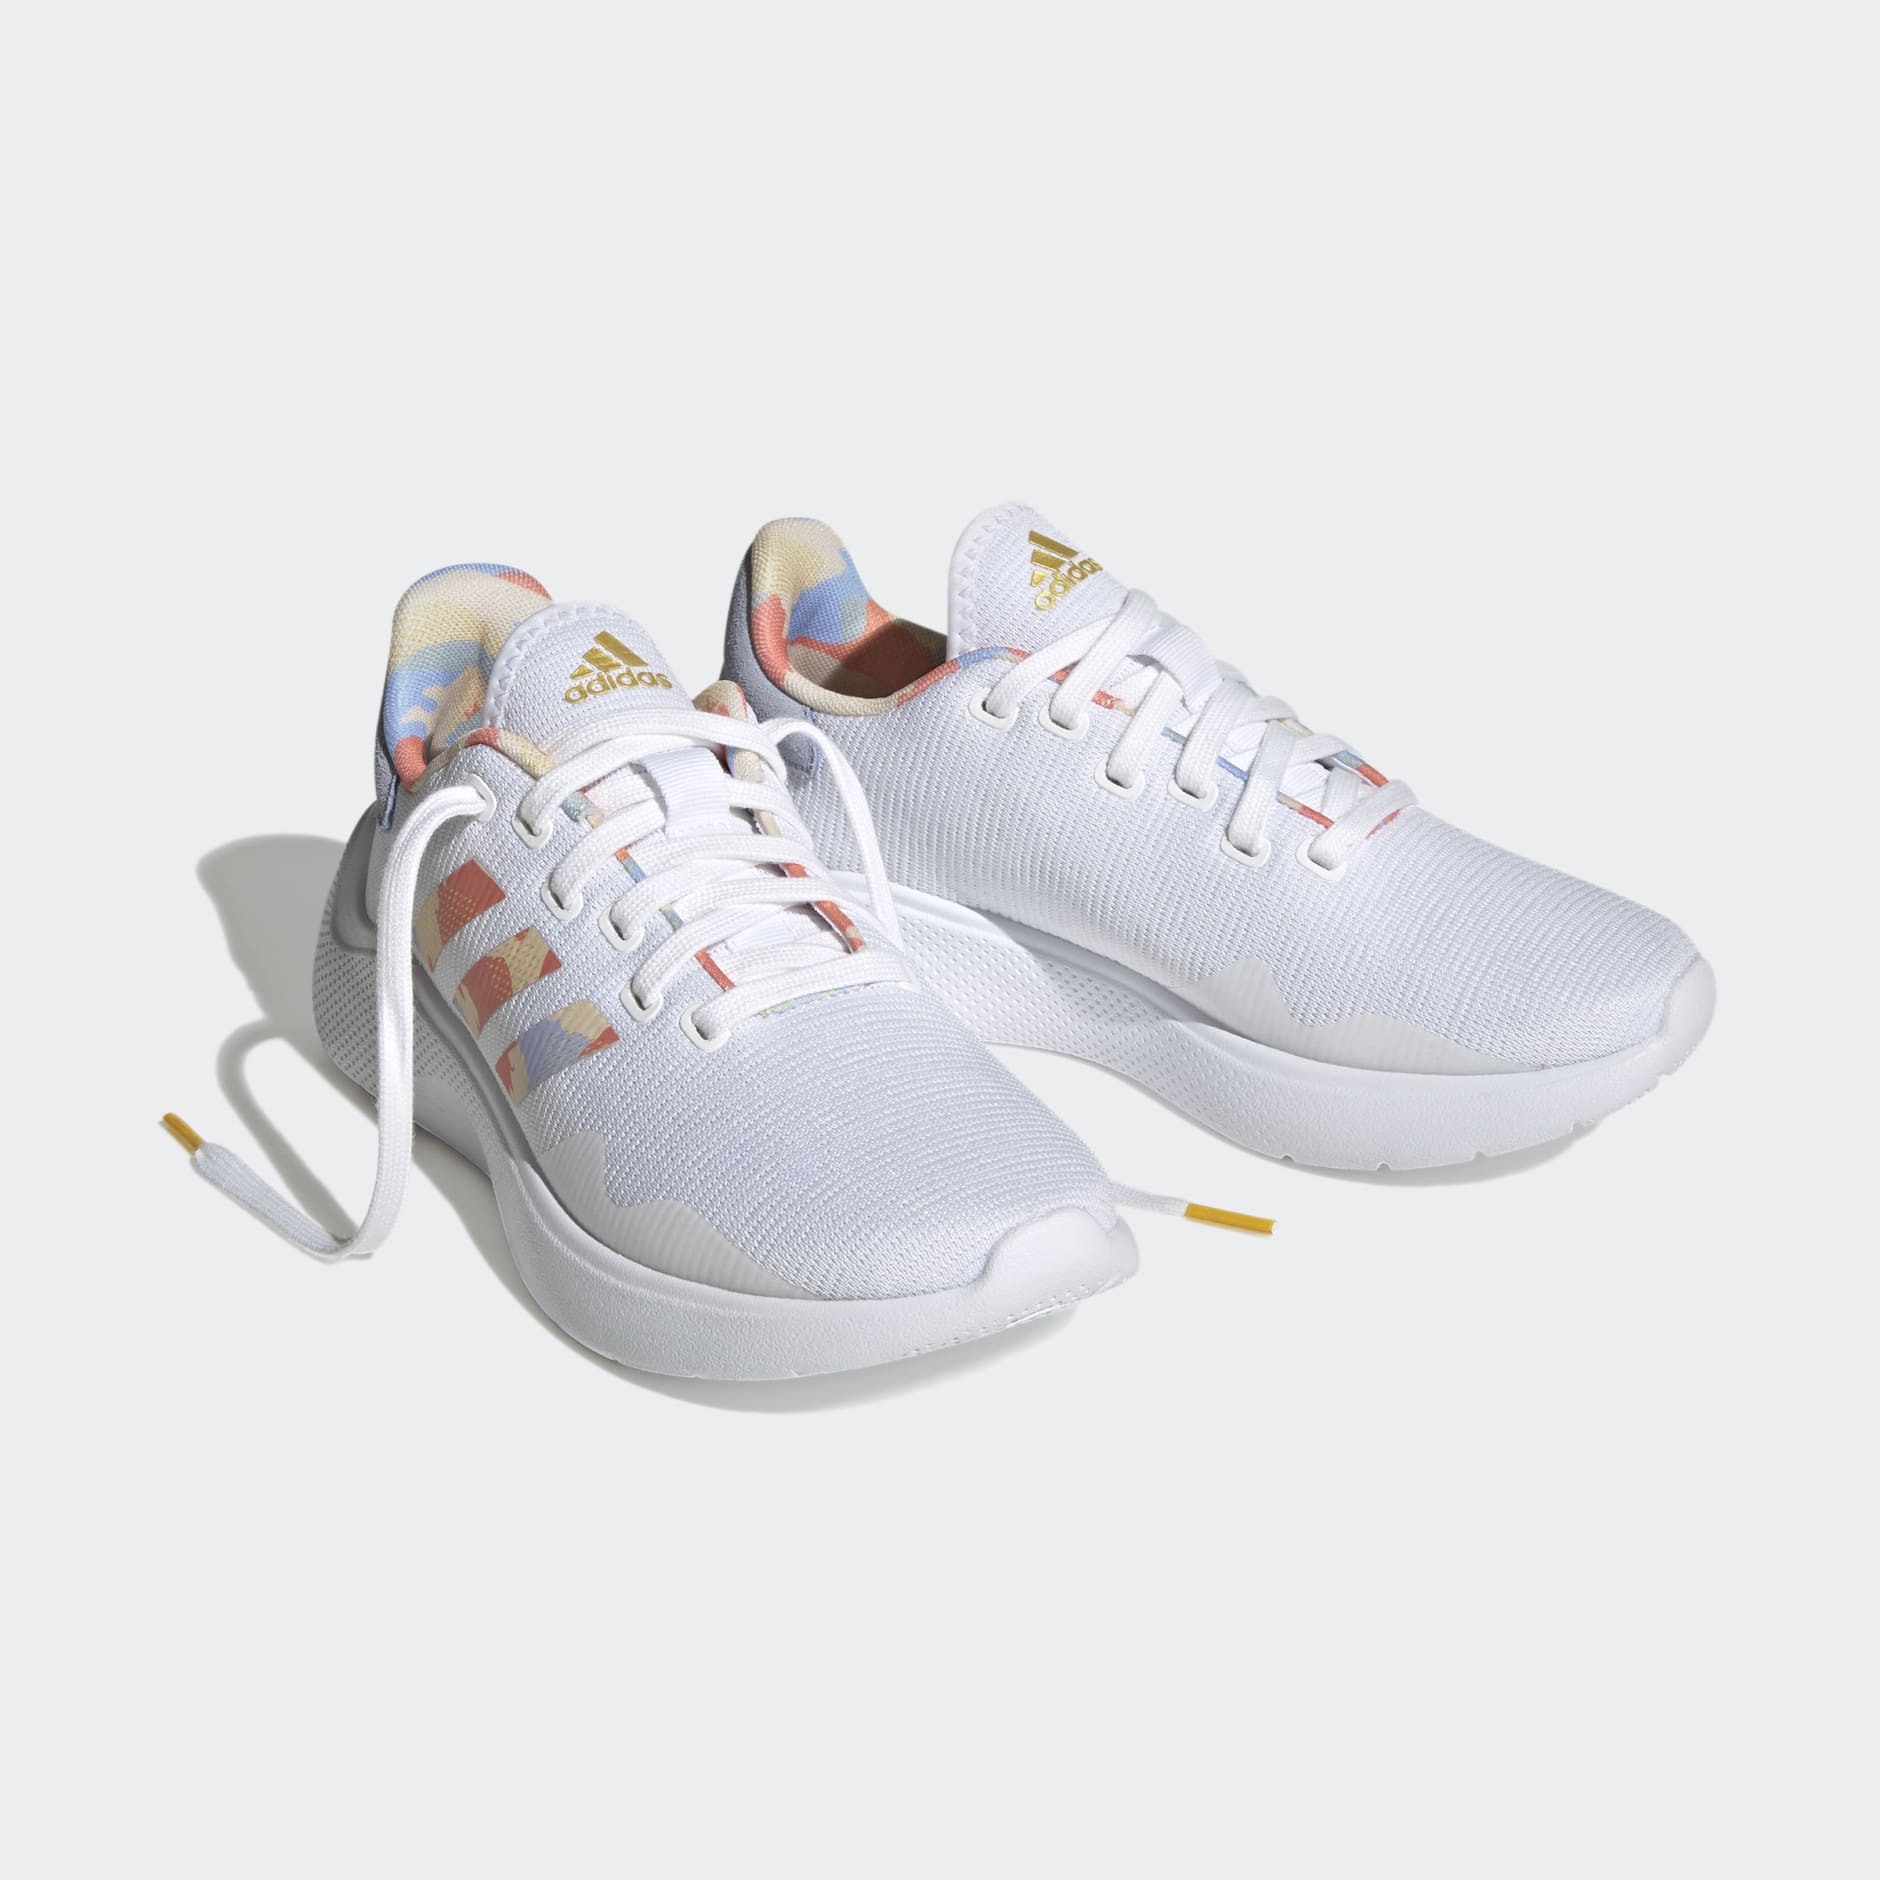 Gelovige Whirlpool Bederven Women's Shoes - Puremotion 2.0 Shoes - White | adidas Oman